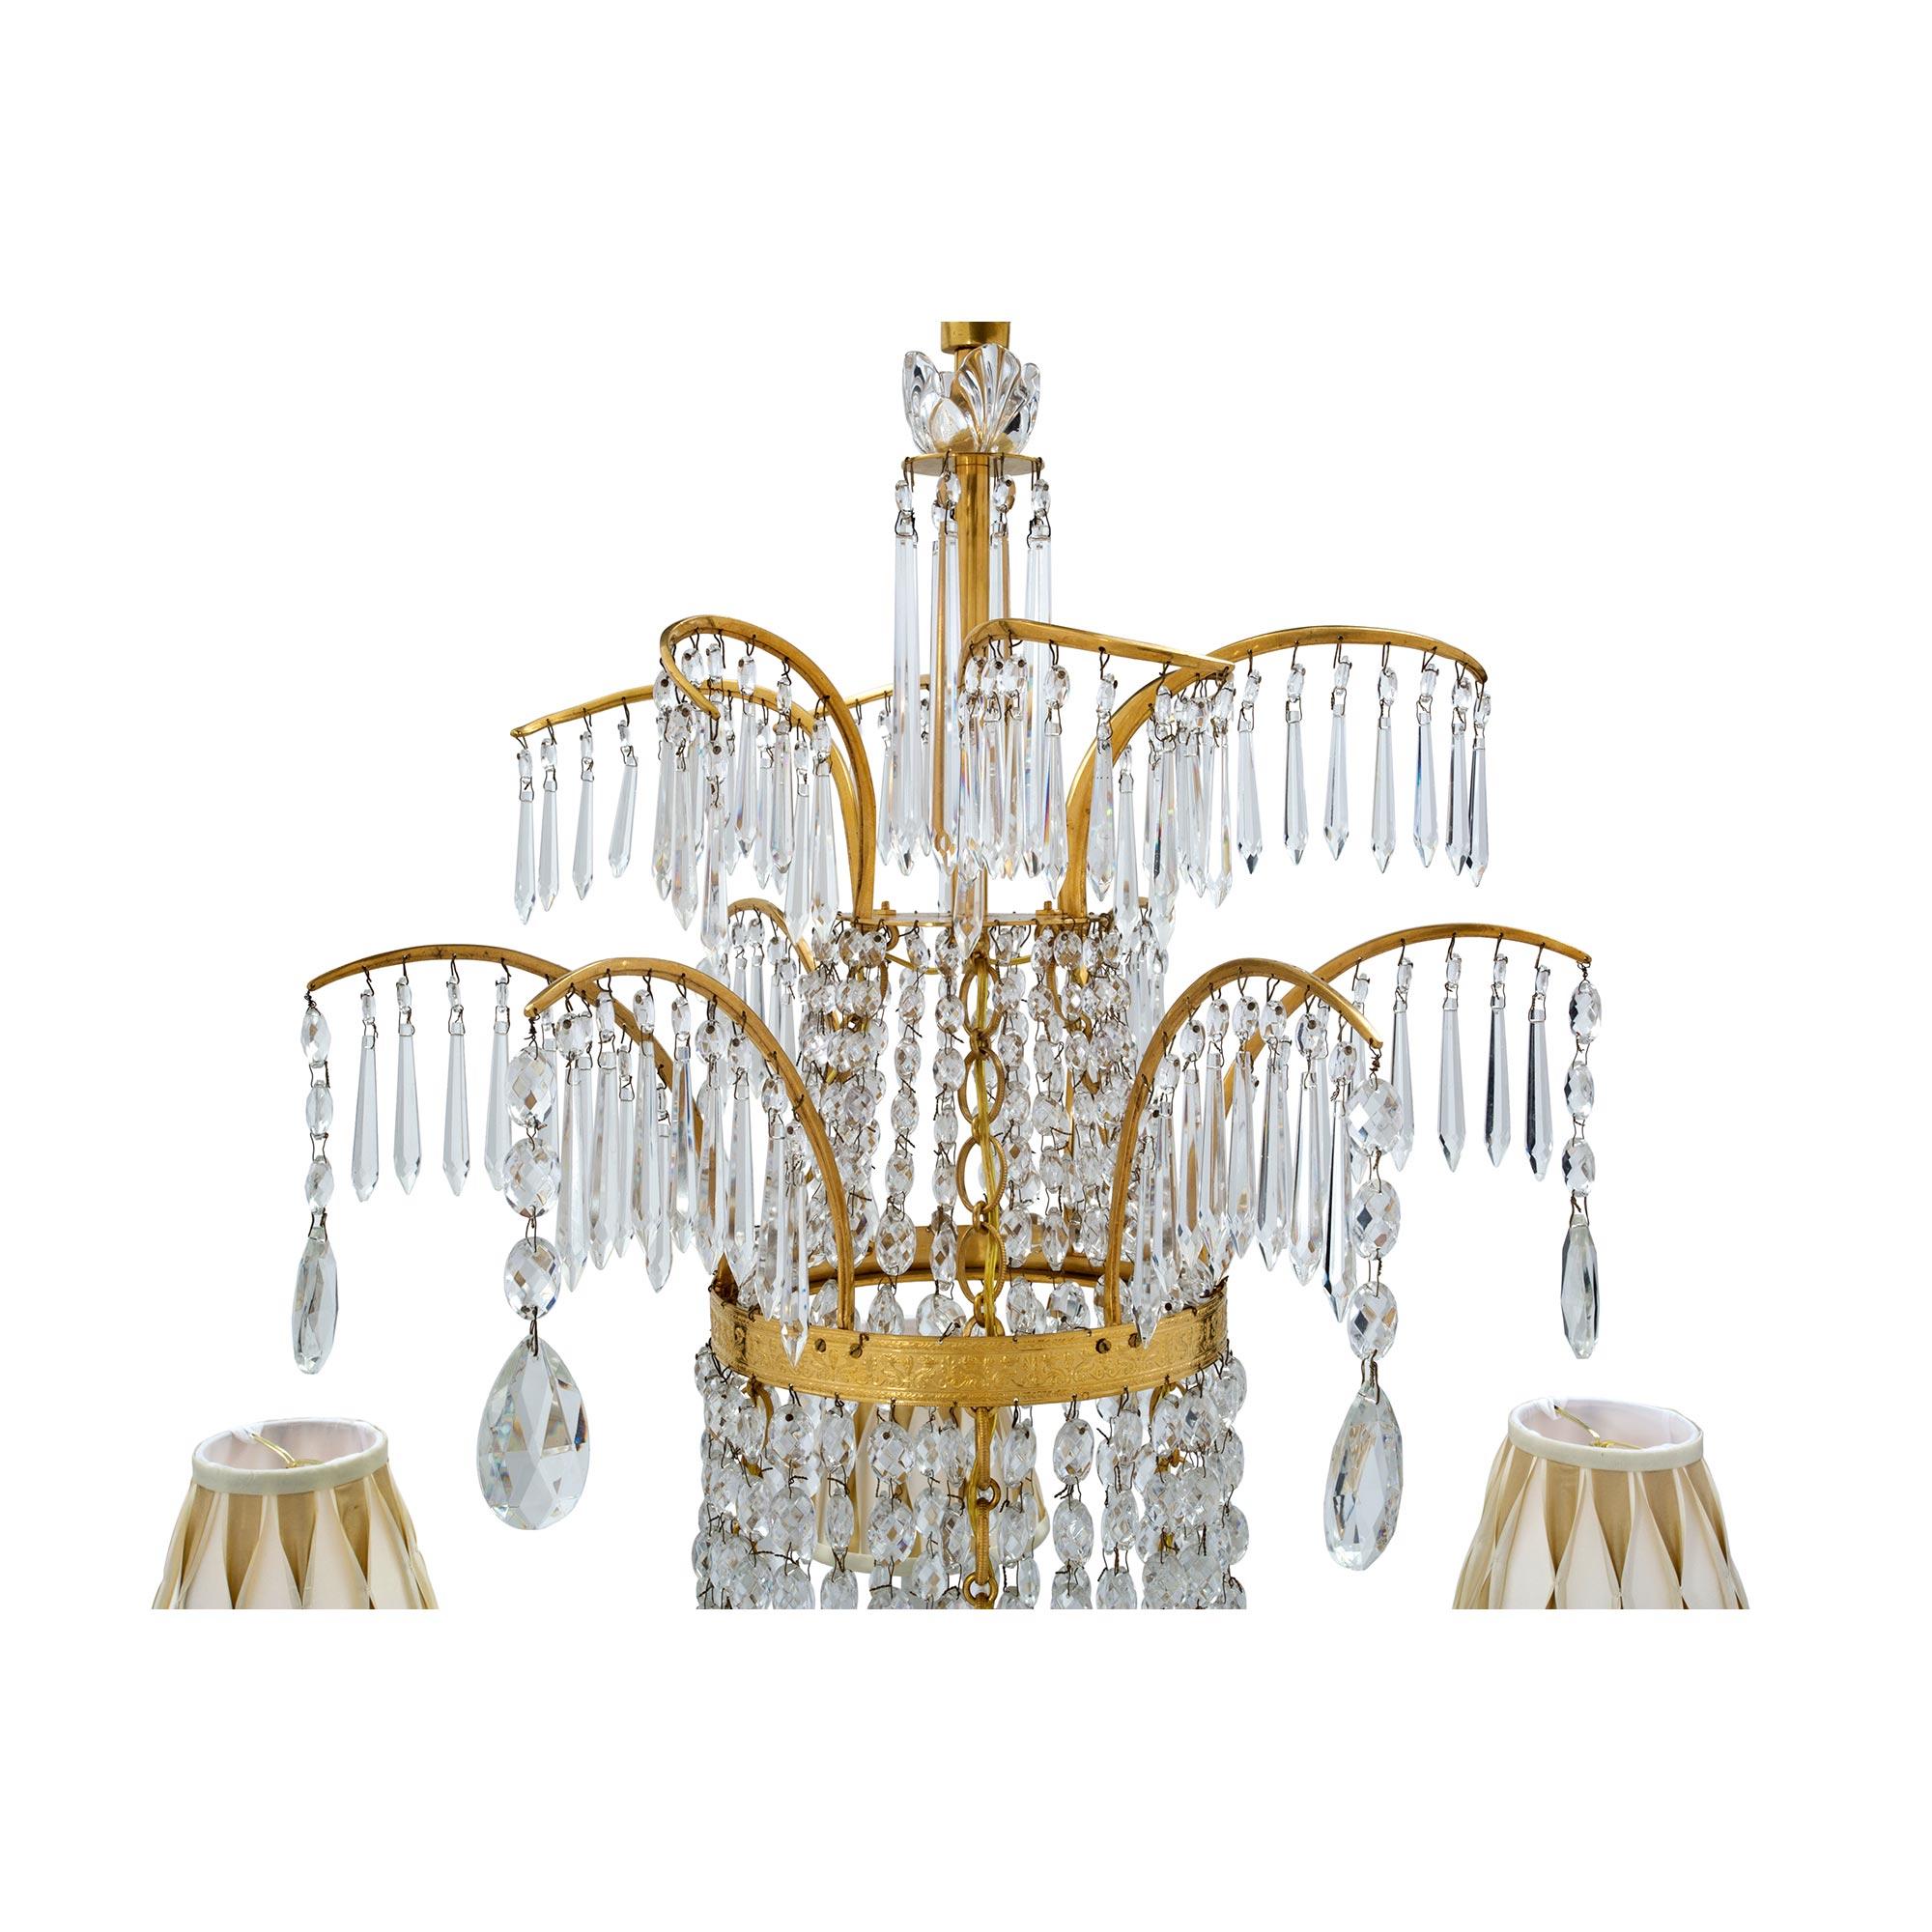 Russian 19th Century Neoclassical Ormolu and Crystal Six-Light Chandelier For Sale 2